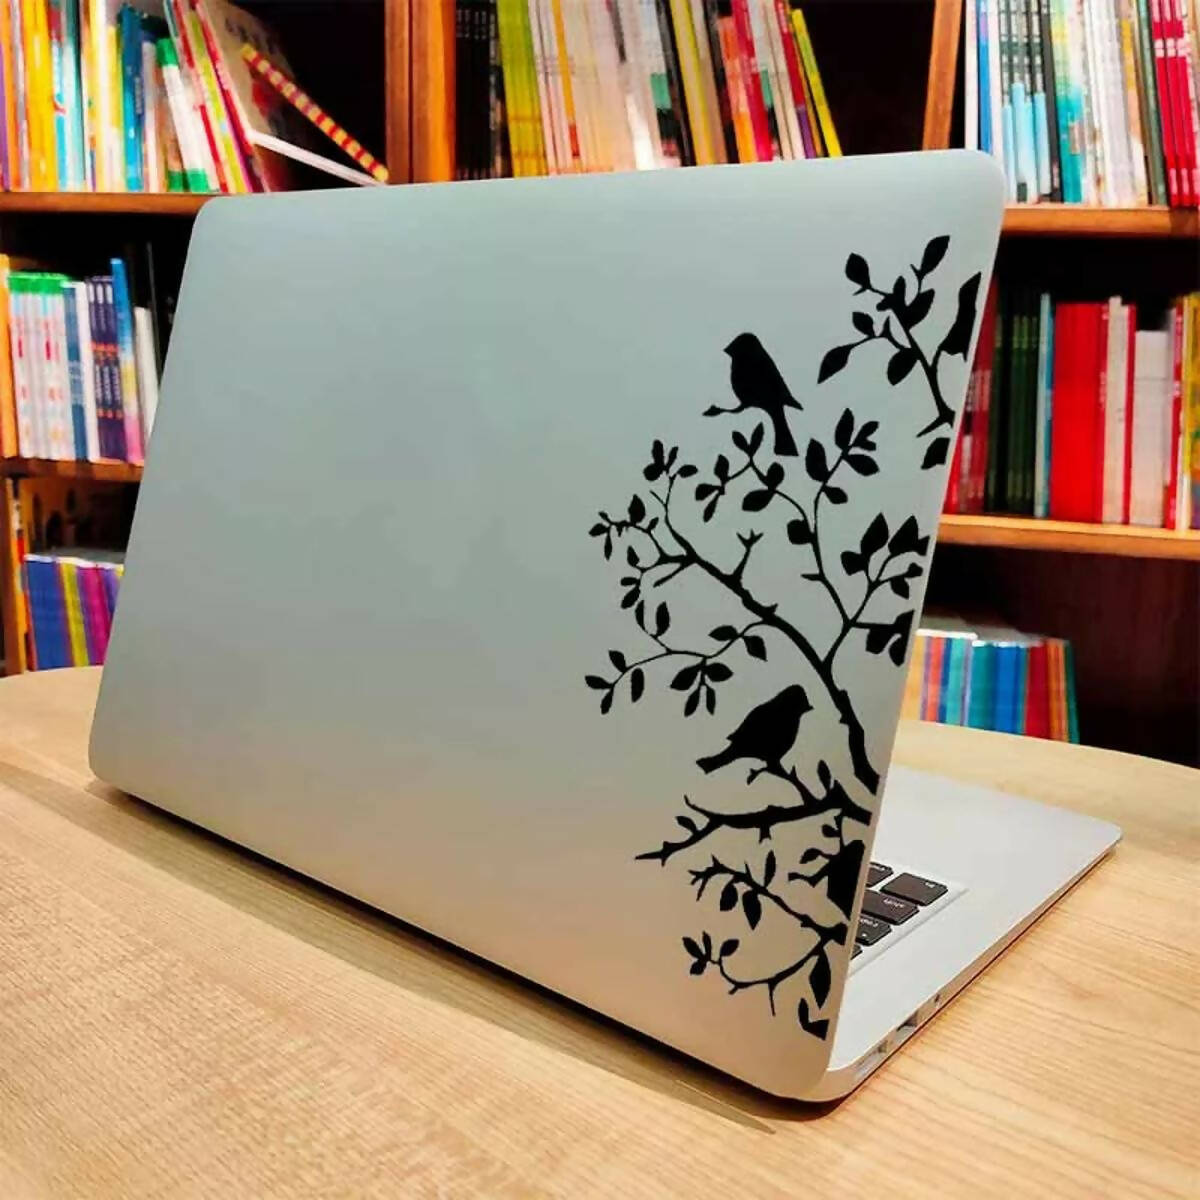 Branches and Birds Fashion Vinyl Decal Laptop Sticker, Laptop